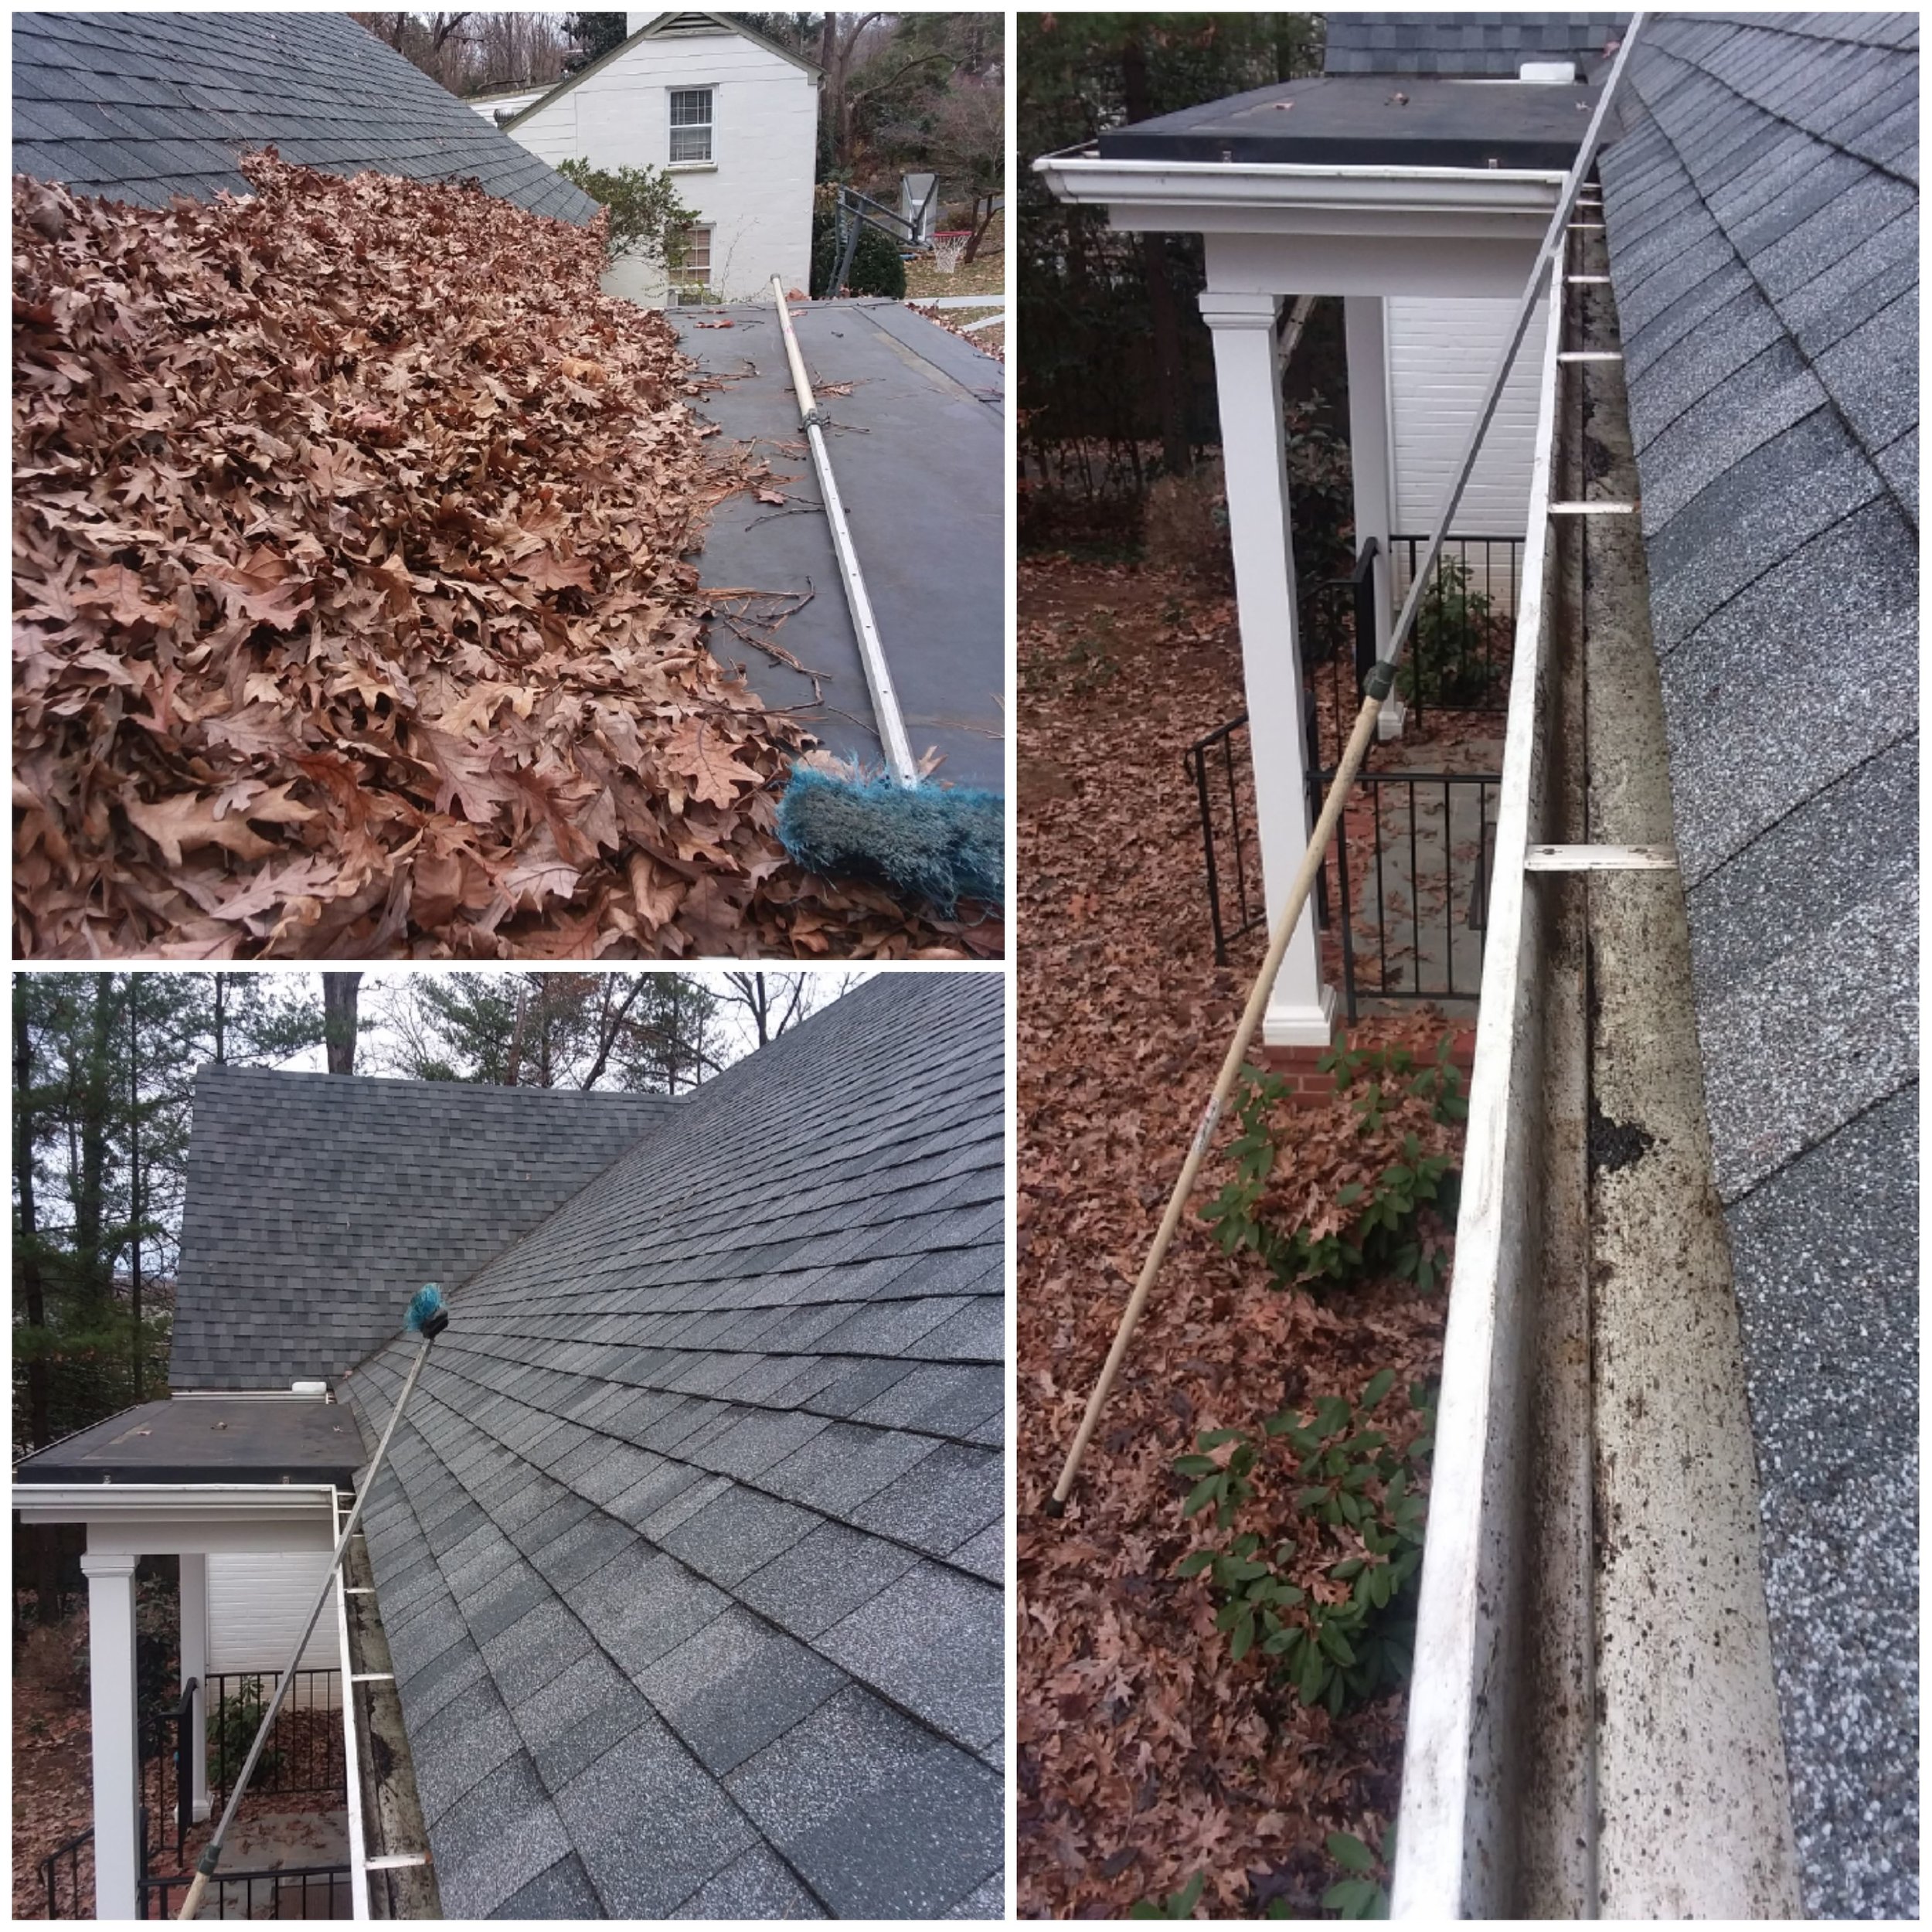 Image collage of leaves on roof and in gutters showing before and after when they're cleaned and unclogged.